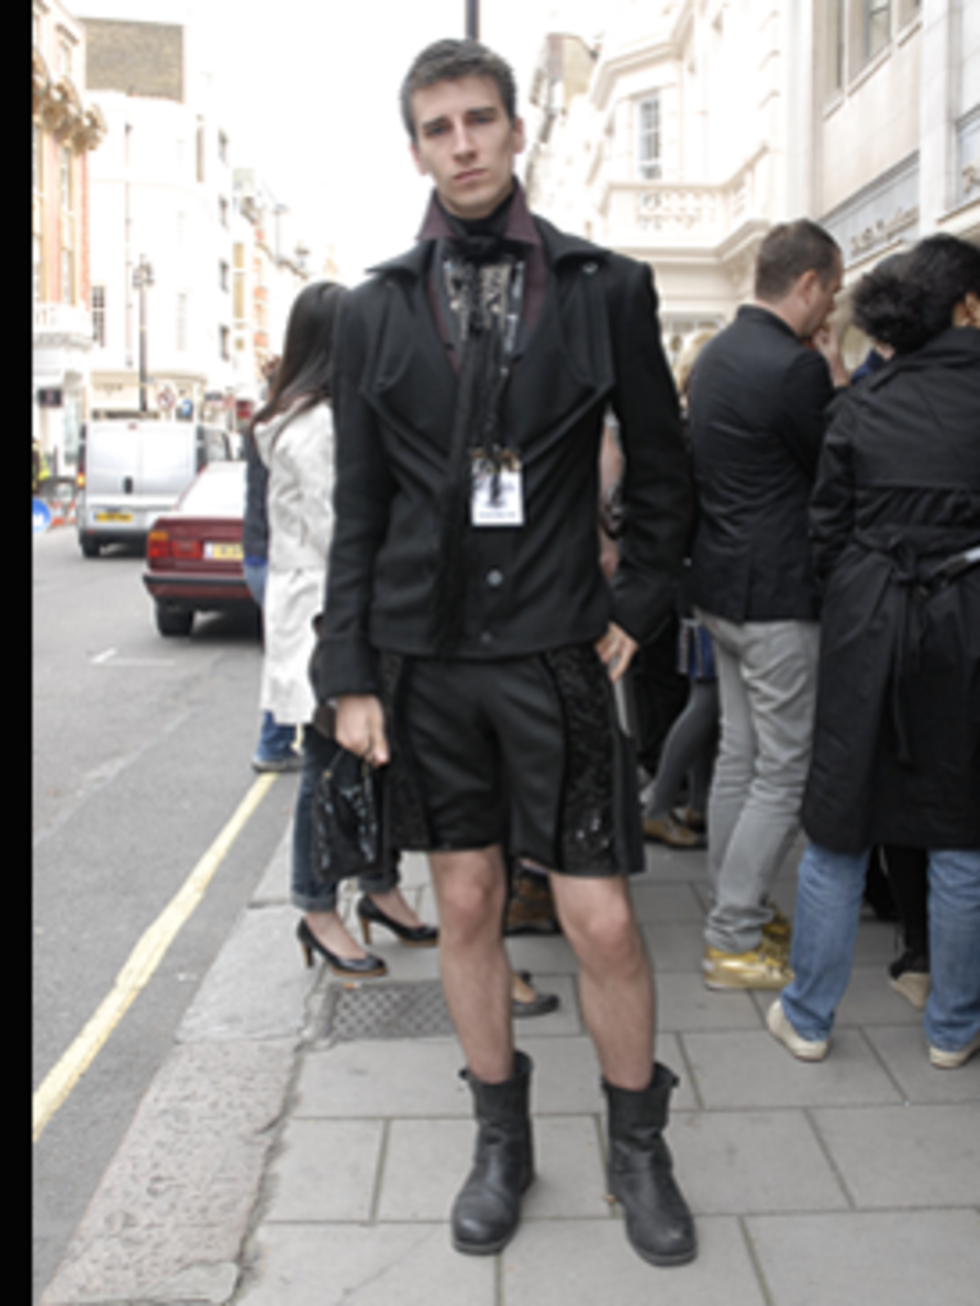 <p>We spotted Matthew, a designer, waiting for the Luella show at Claridges. Not content with any old suit, Matthew's has sequined panels. We love his Chloe inspired biker boots.</p>